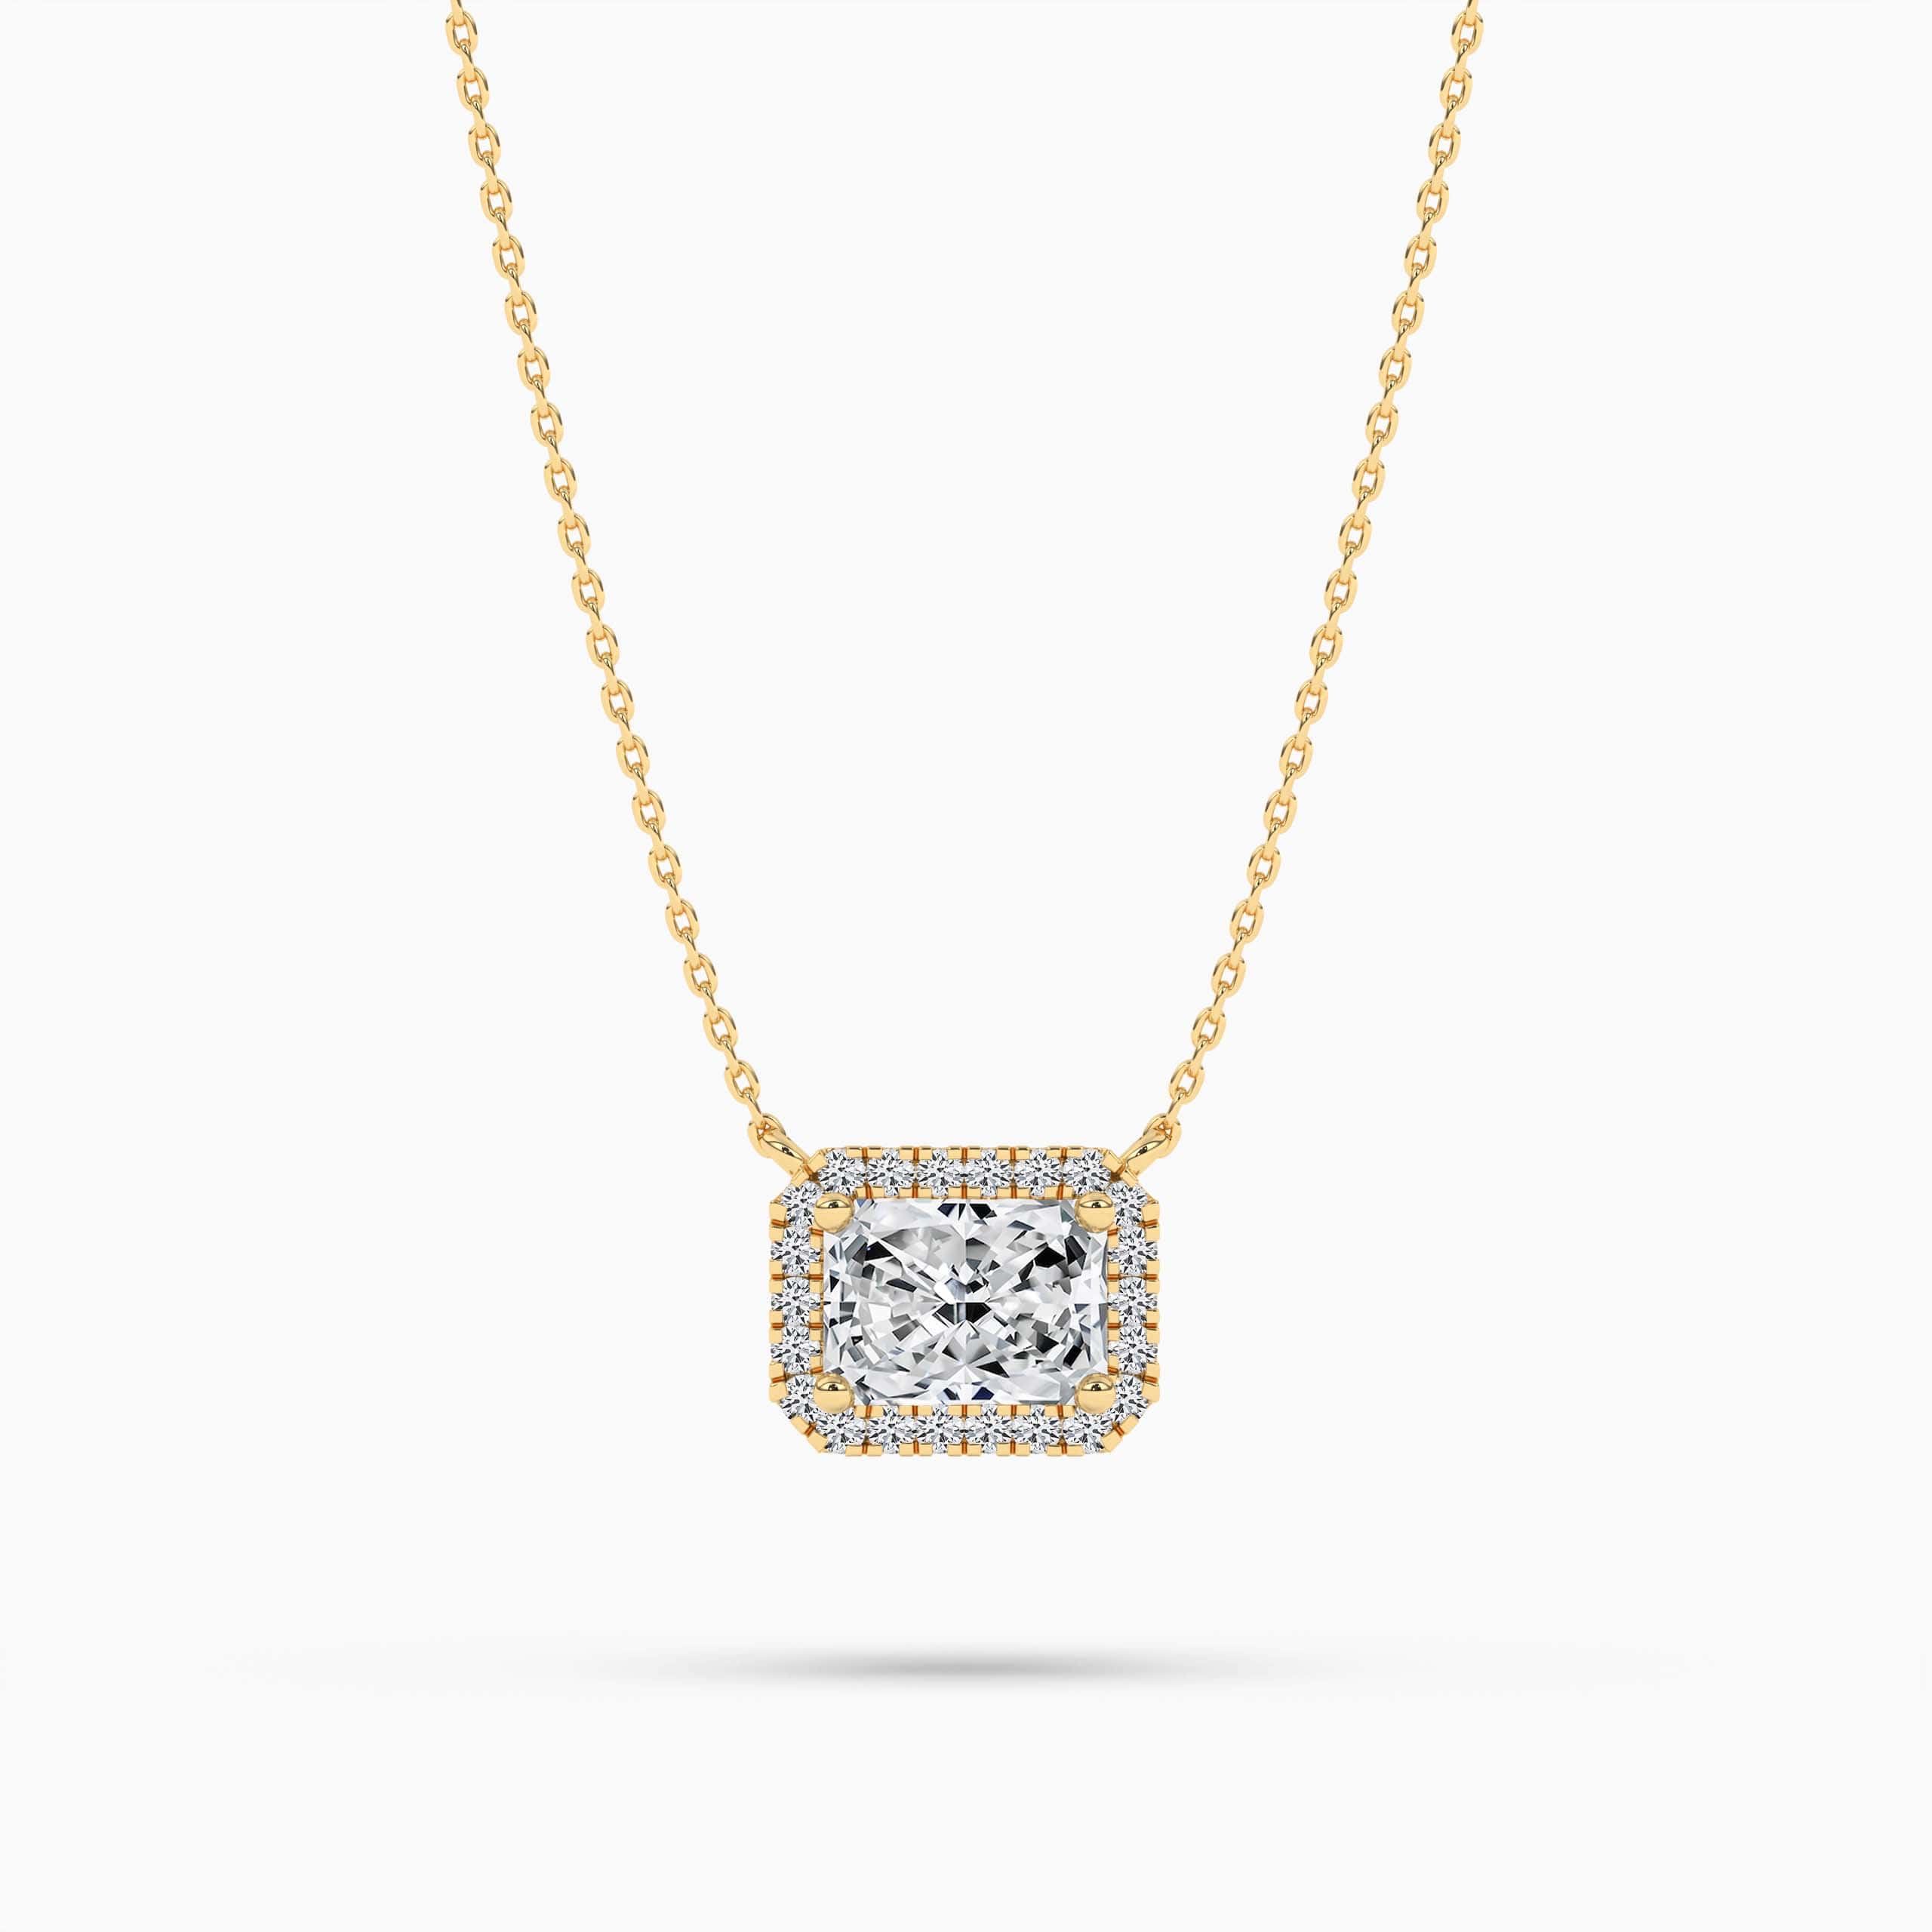 East West Pendant Radiant Cut Diamond In Yellow Gold